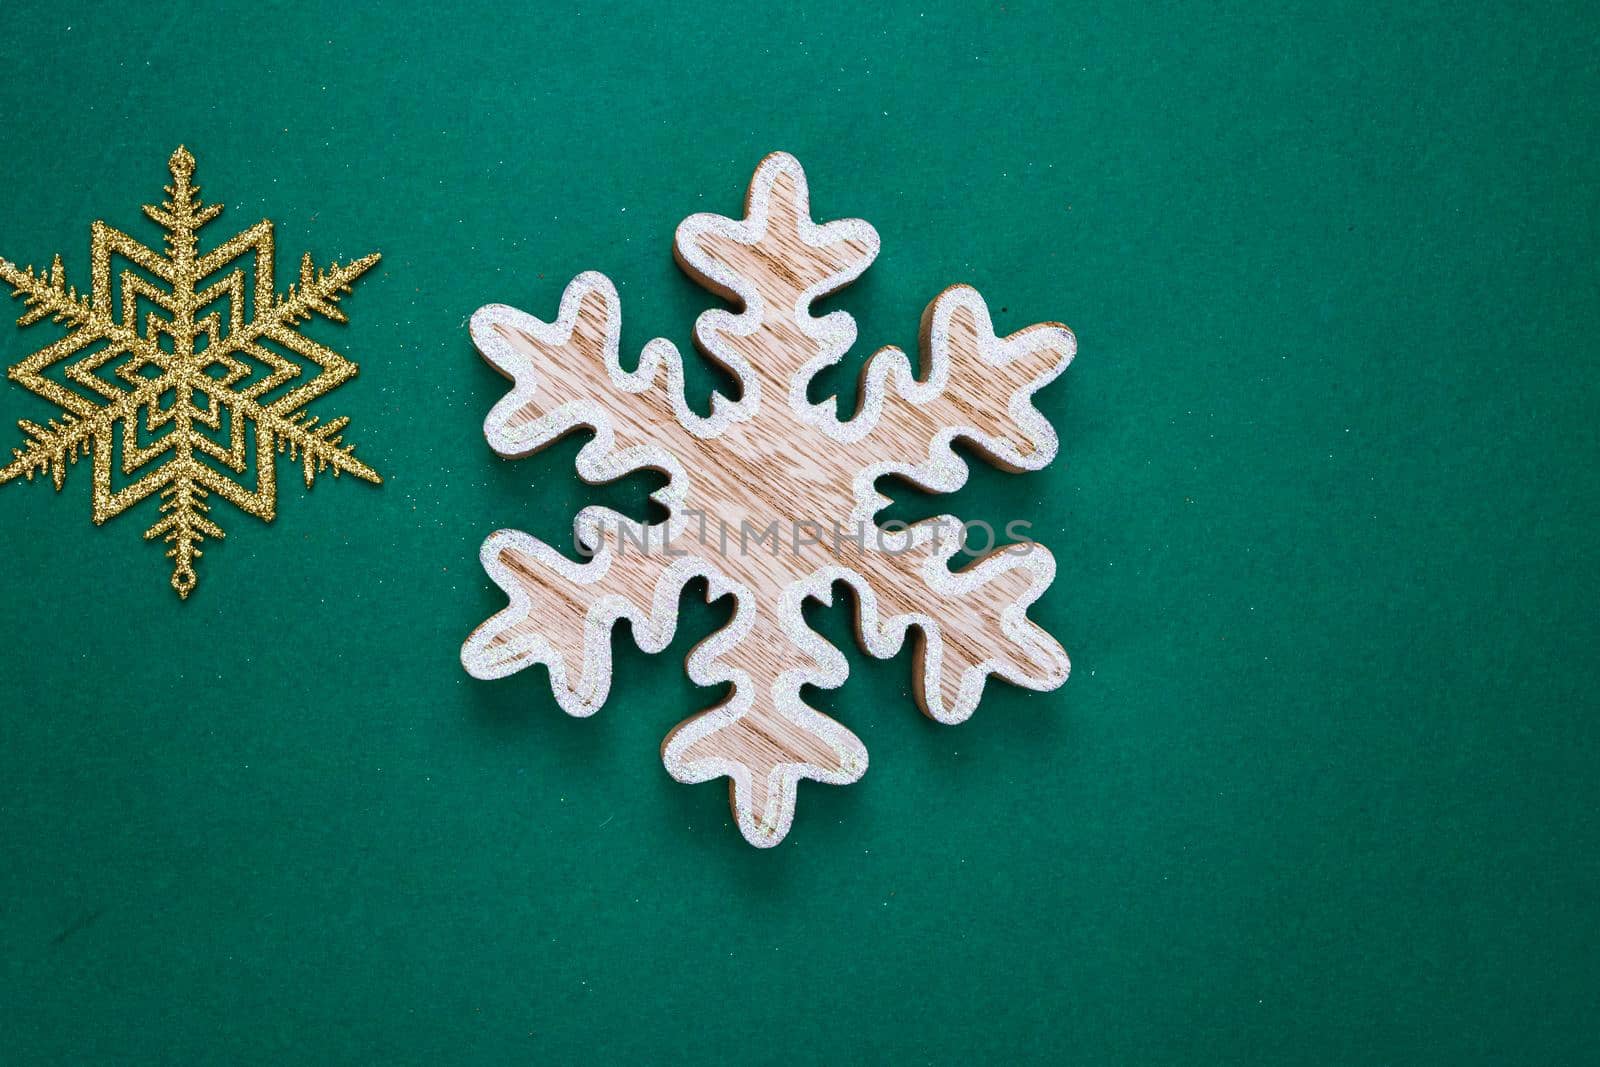 Snowflakes Christmas decoration on green background. Top view with copy space for december season.